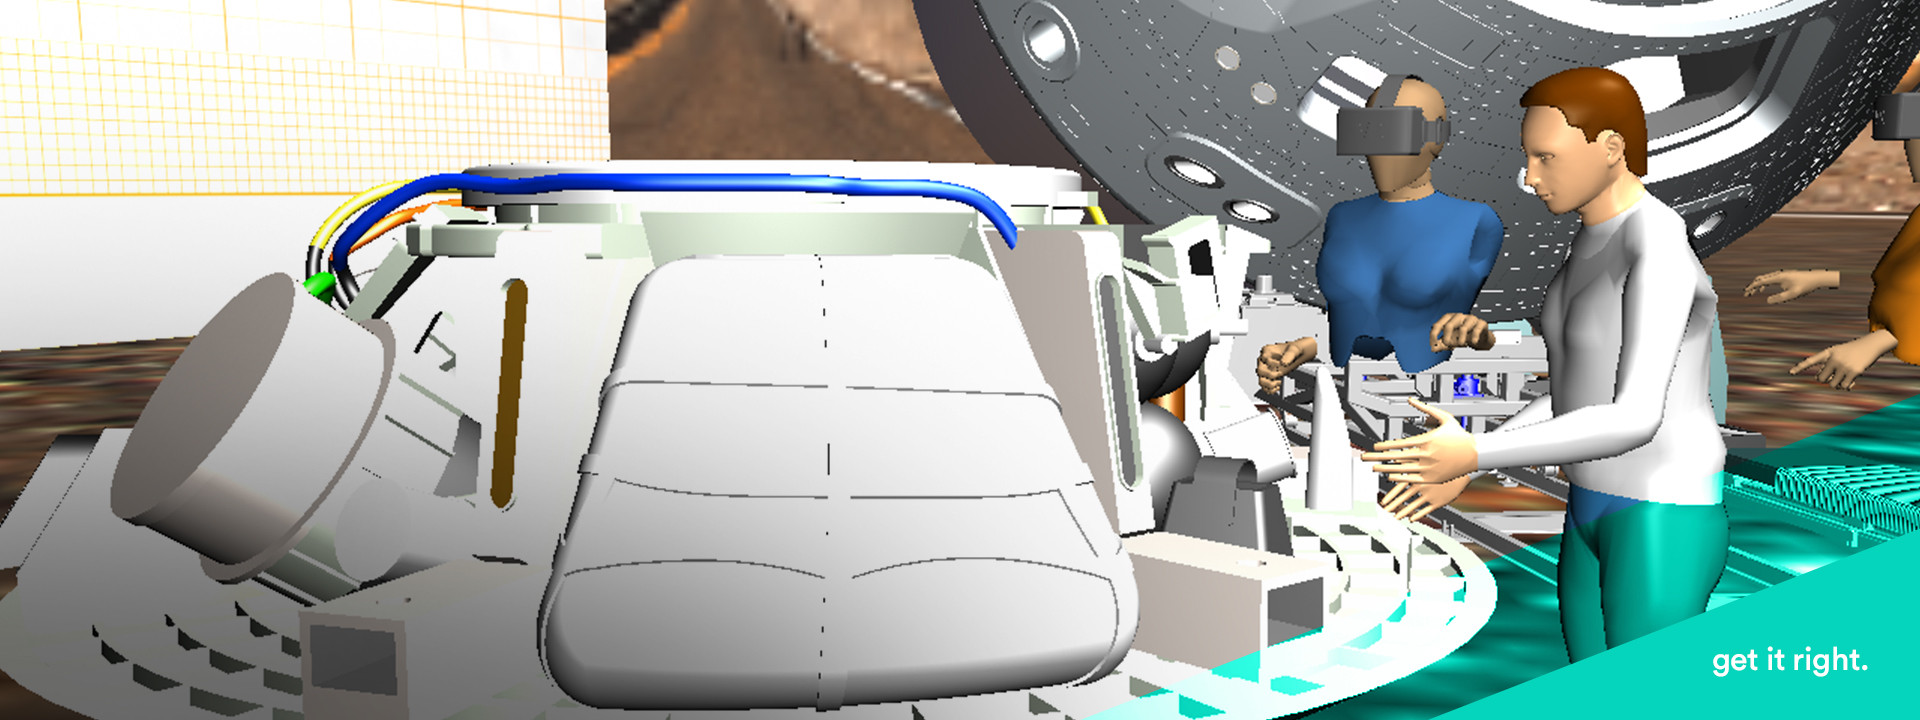 Bring Back Hands-On,Experiential Discovery with    Advanced Virtual Reality for Aerospace